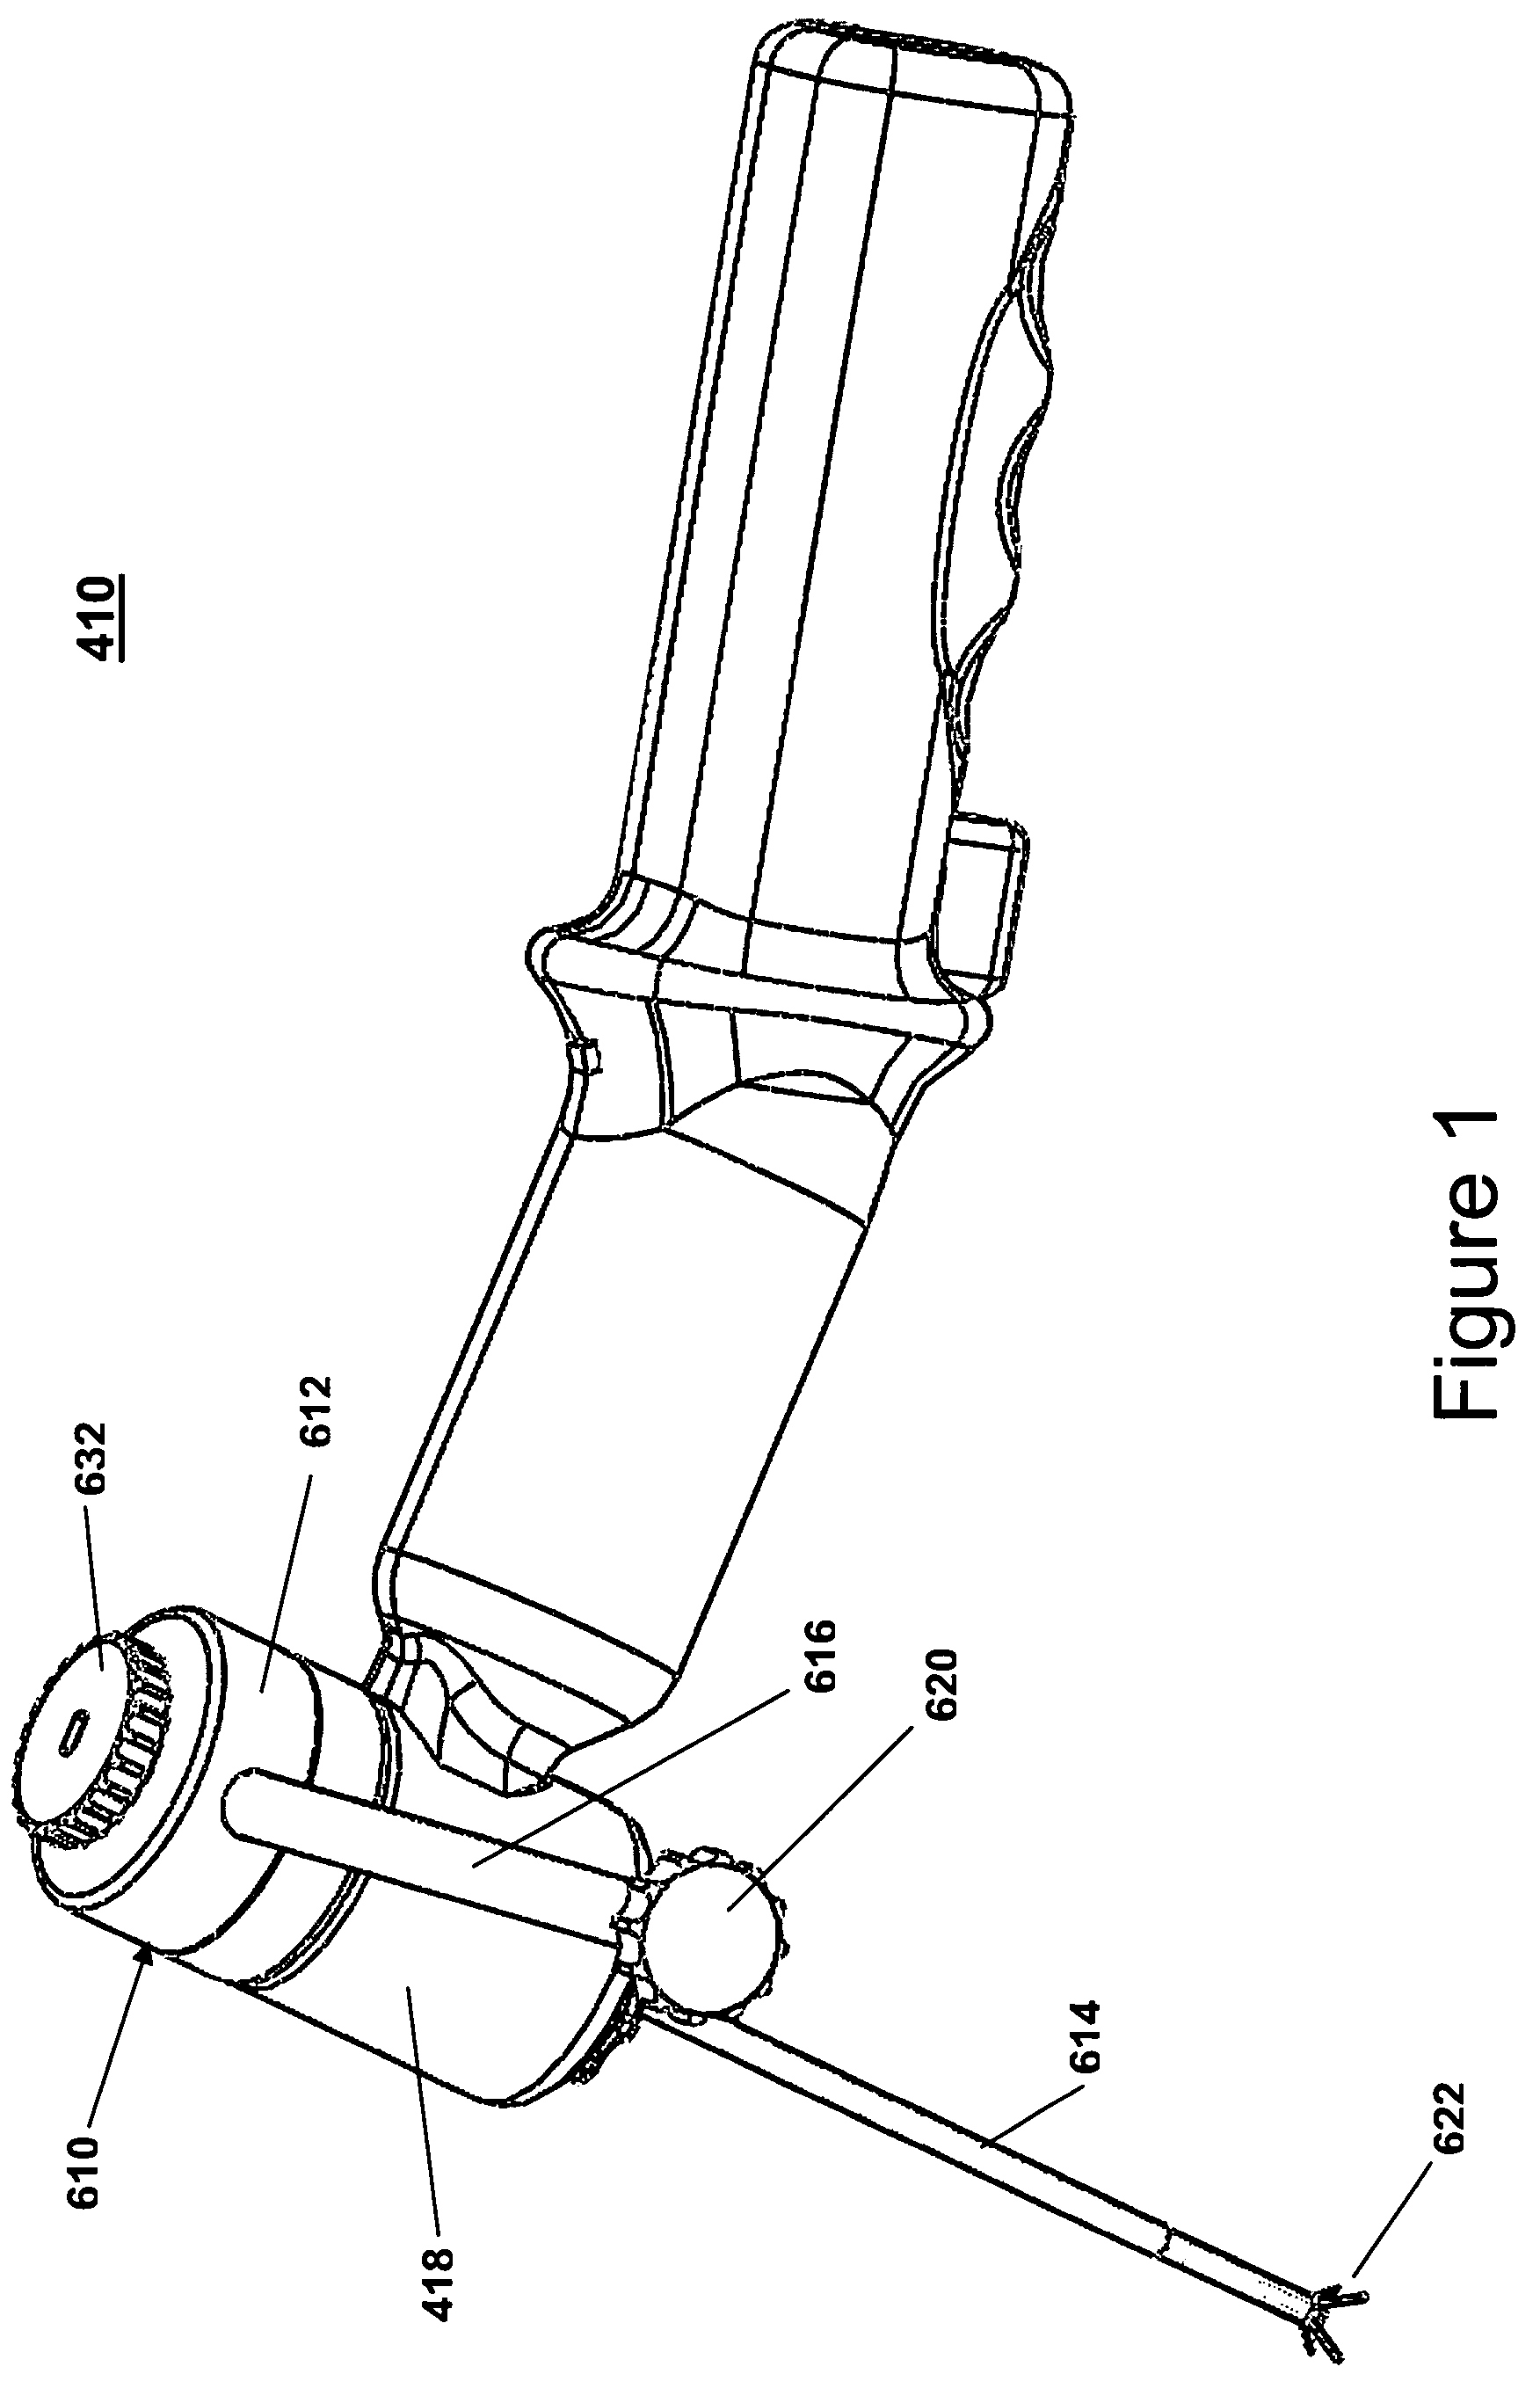 Cavity creation device and methods of use